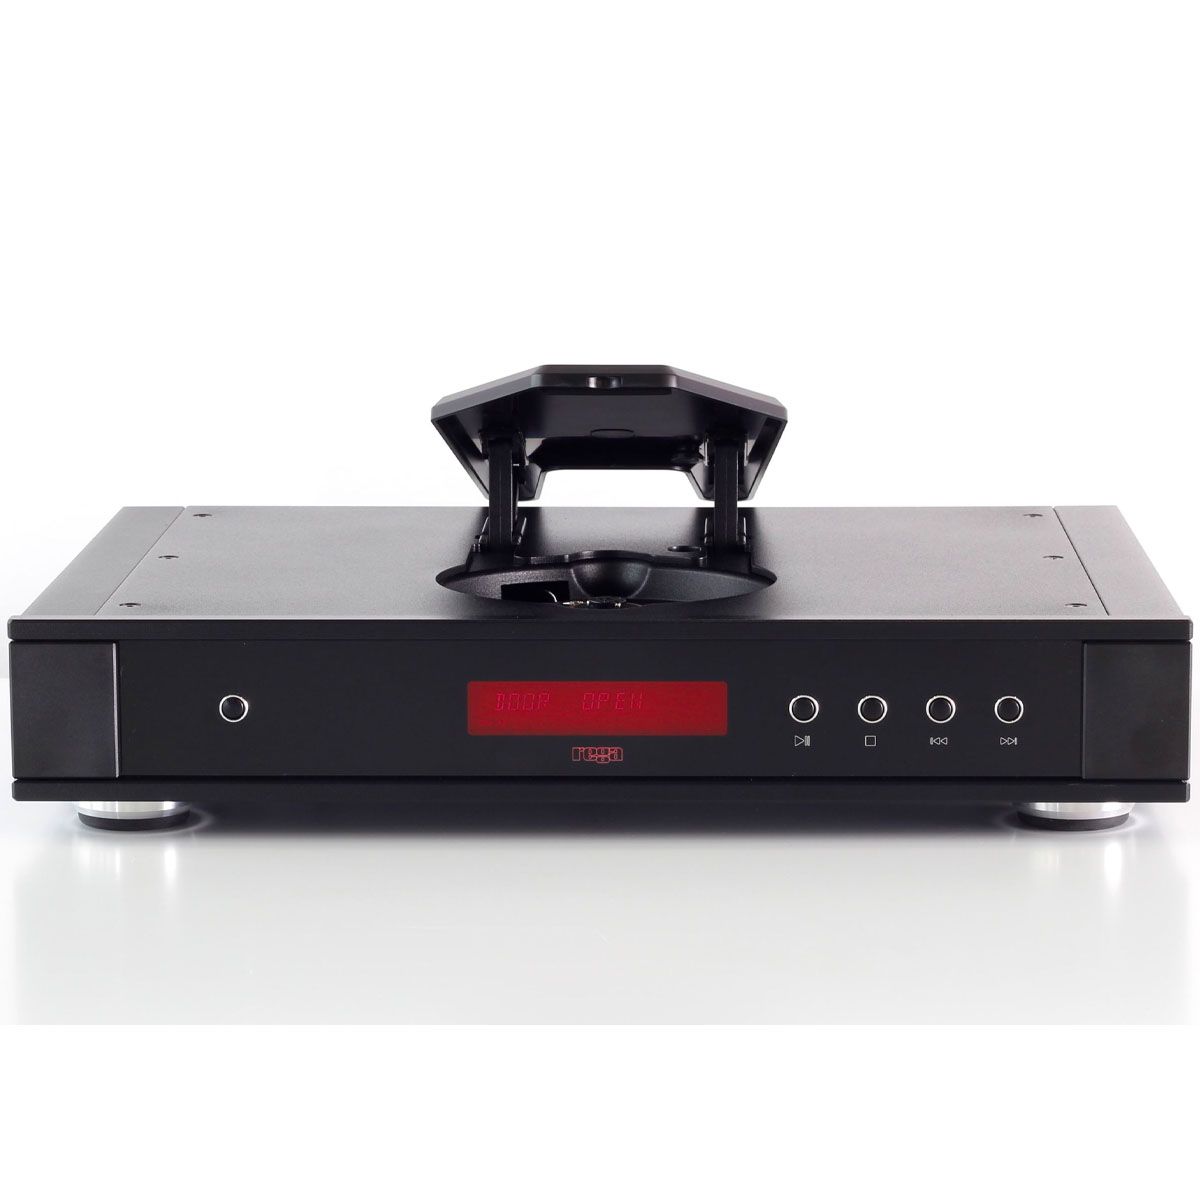 Rega Saturn MK3 CD & DAC Player - front view with lid open